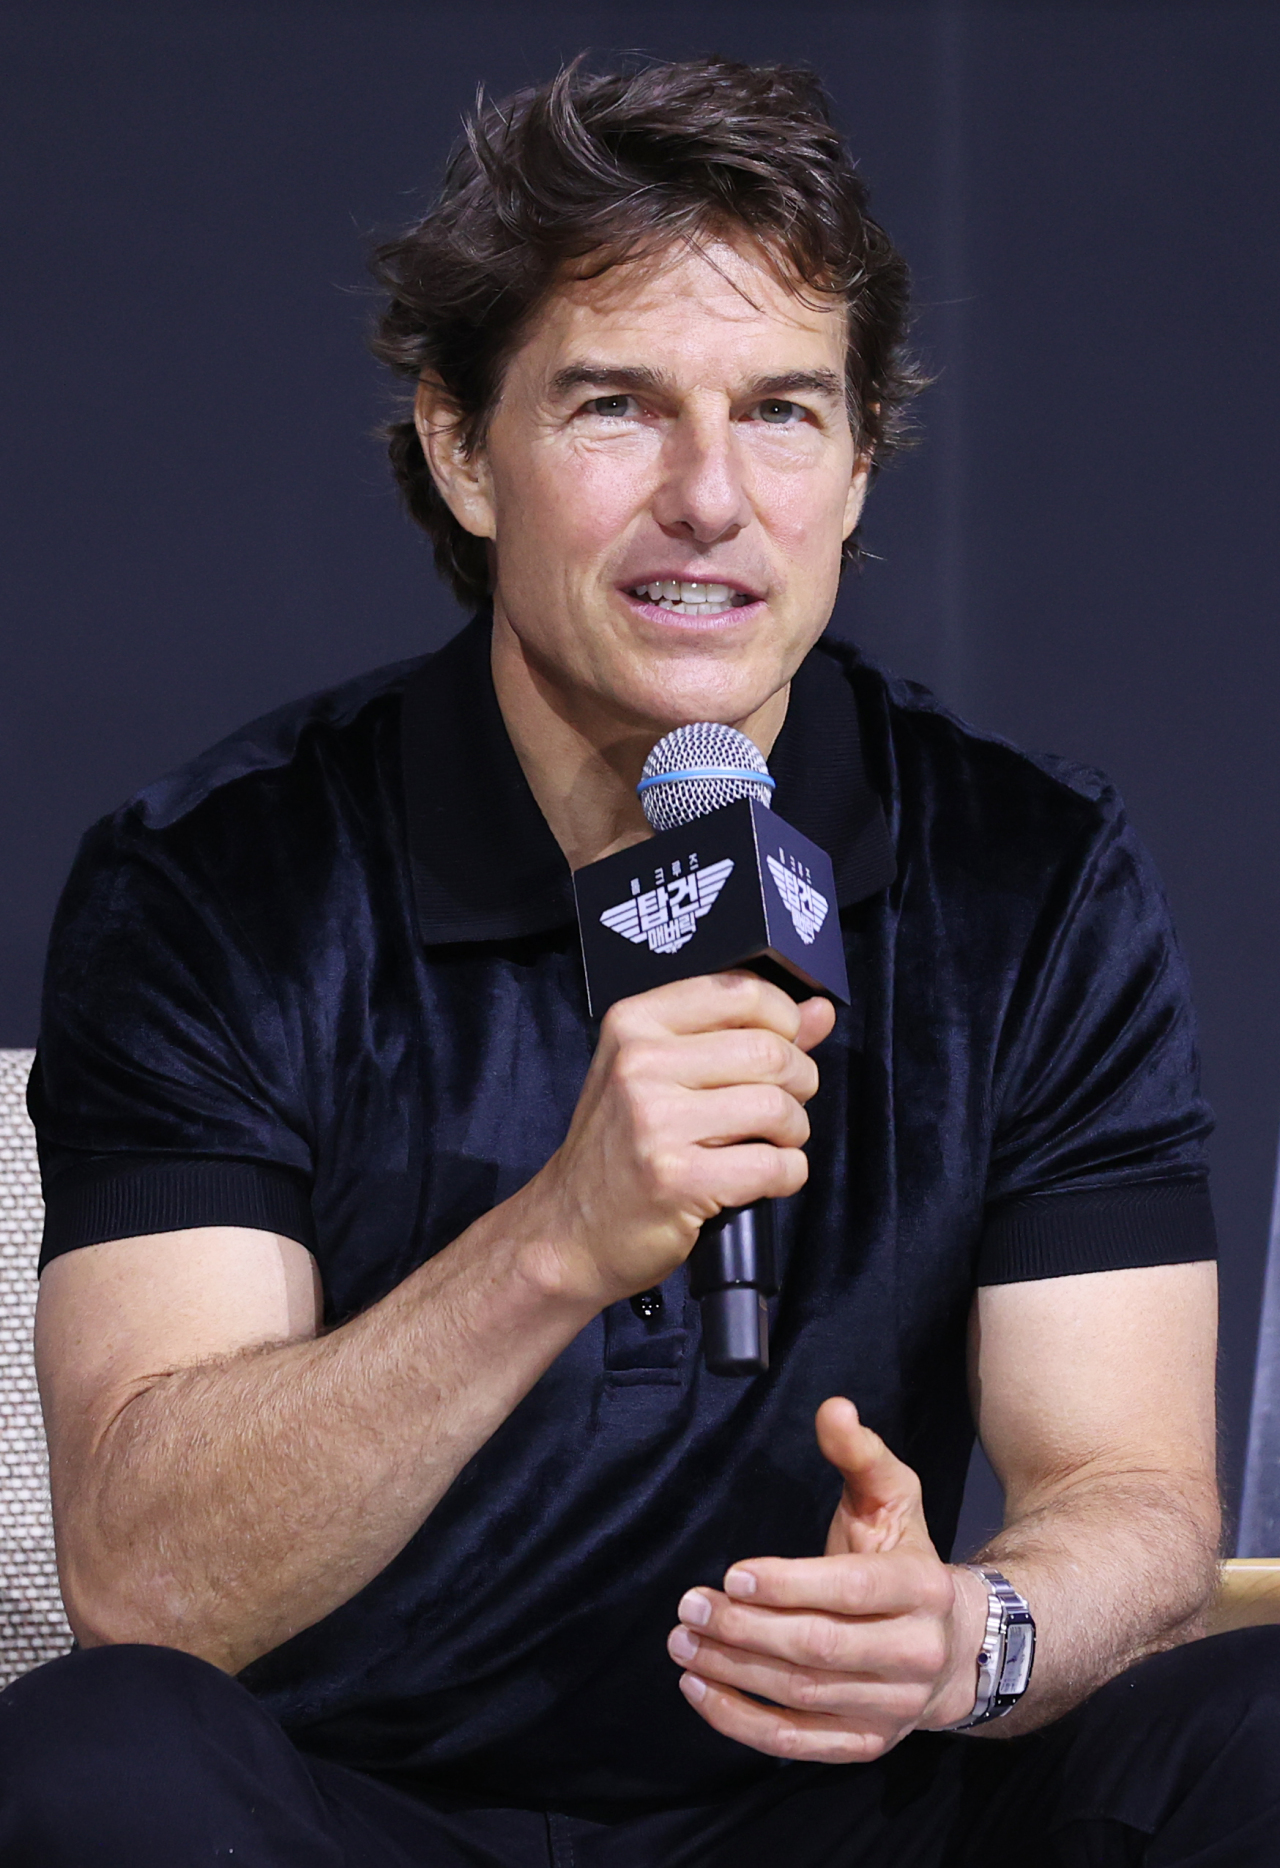 Tom Cruise talks during a press conference for “Top Gun: Maverick” at Lotte Hotel in Seoul on Monday. (Yonhap)